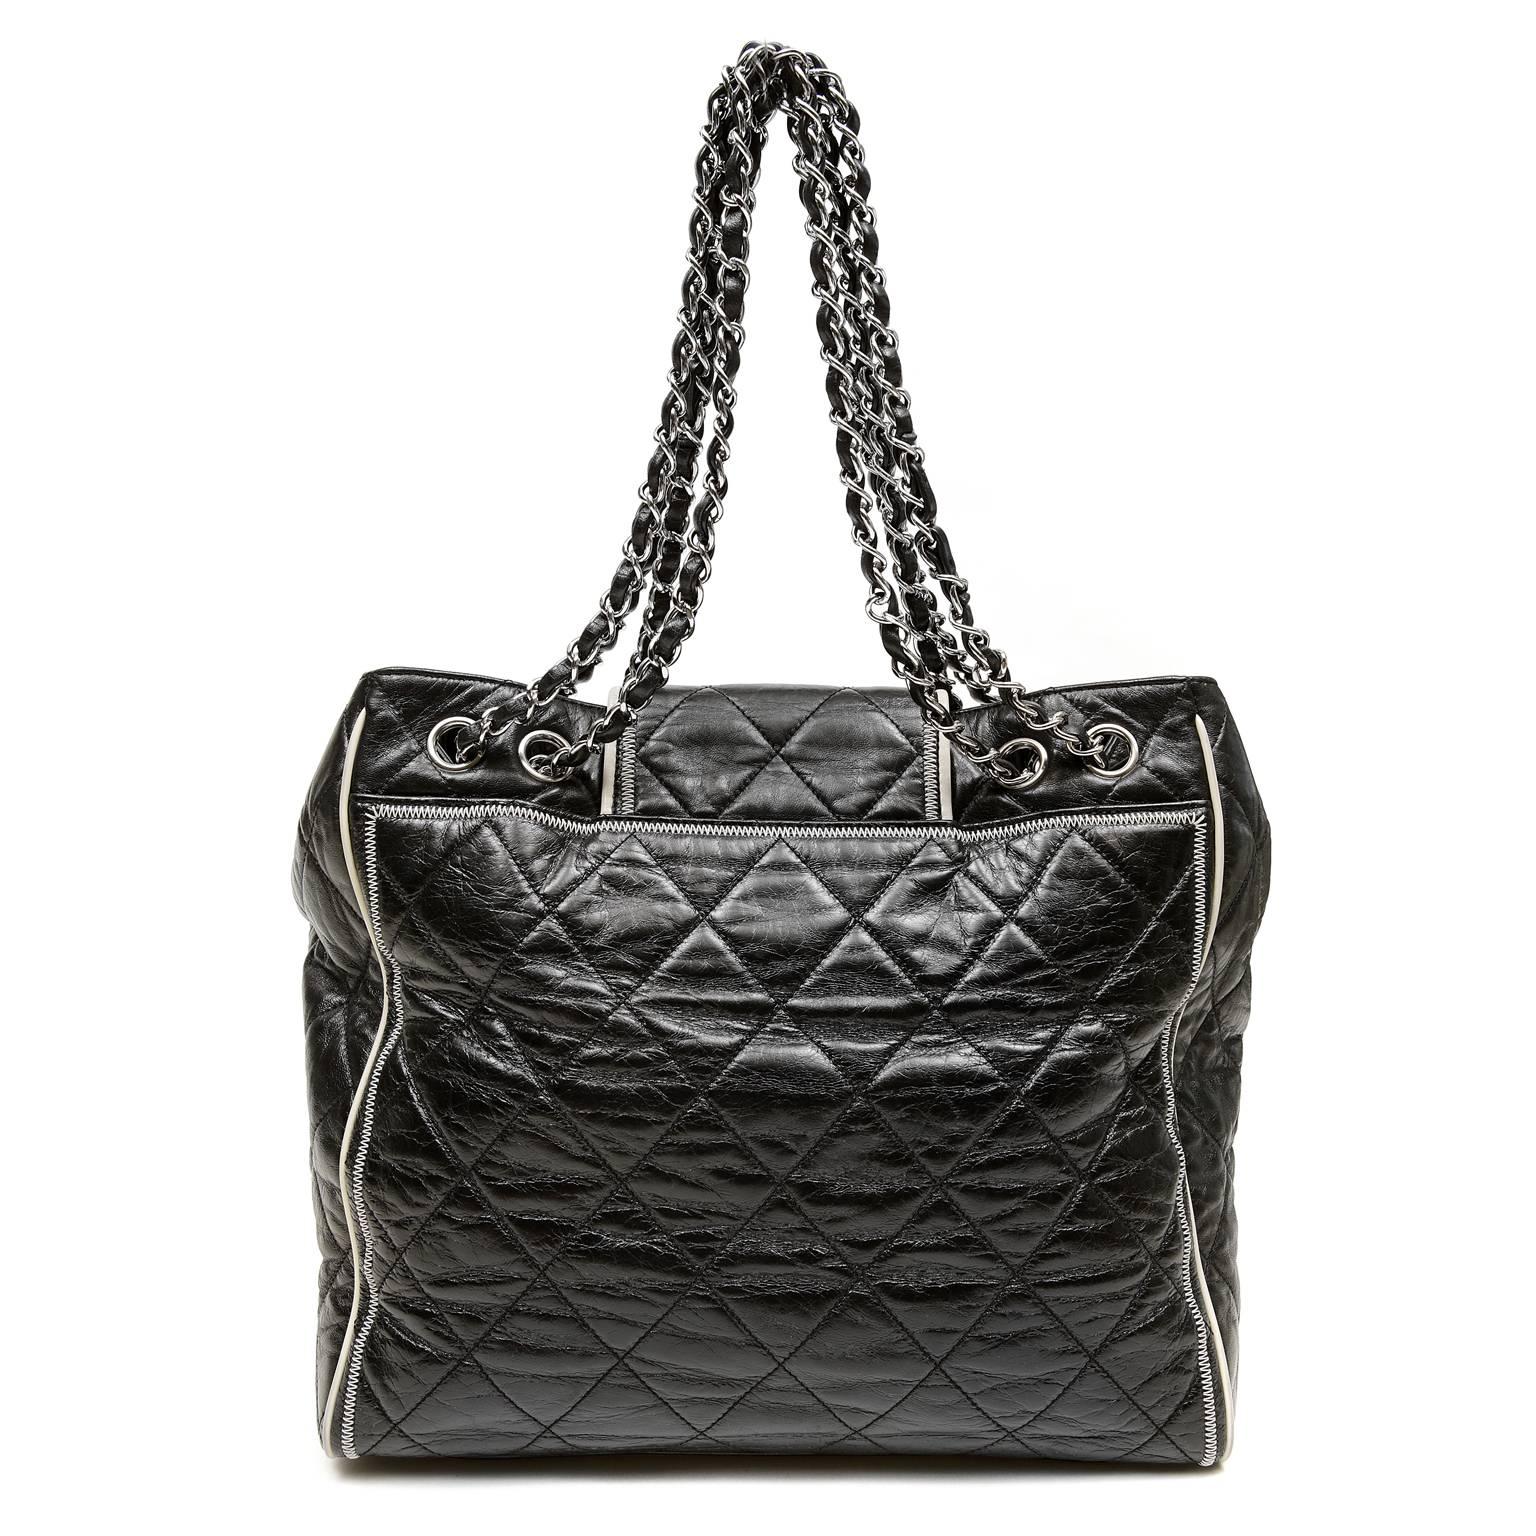 Chanel Black Mademoiselle Flap Tote- PRISTINE
 Cream leather piping and zigzag stitching bring striking contrast to this edgy daily carryall.
Black leather north south tote is quilted in signature Chanel diamond pattern.  Cream leather piping and